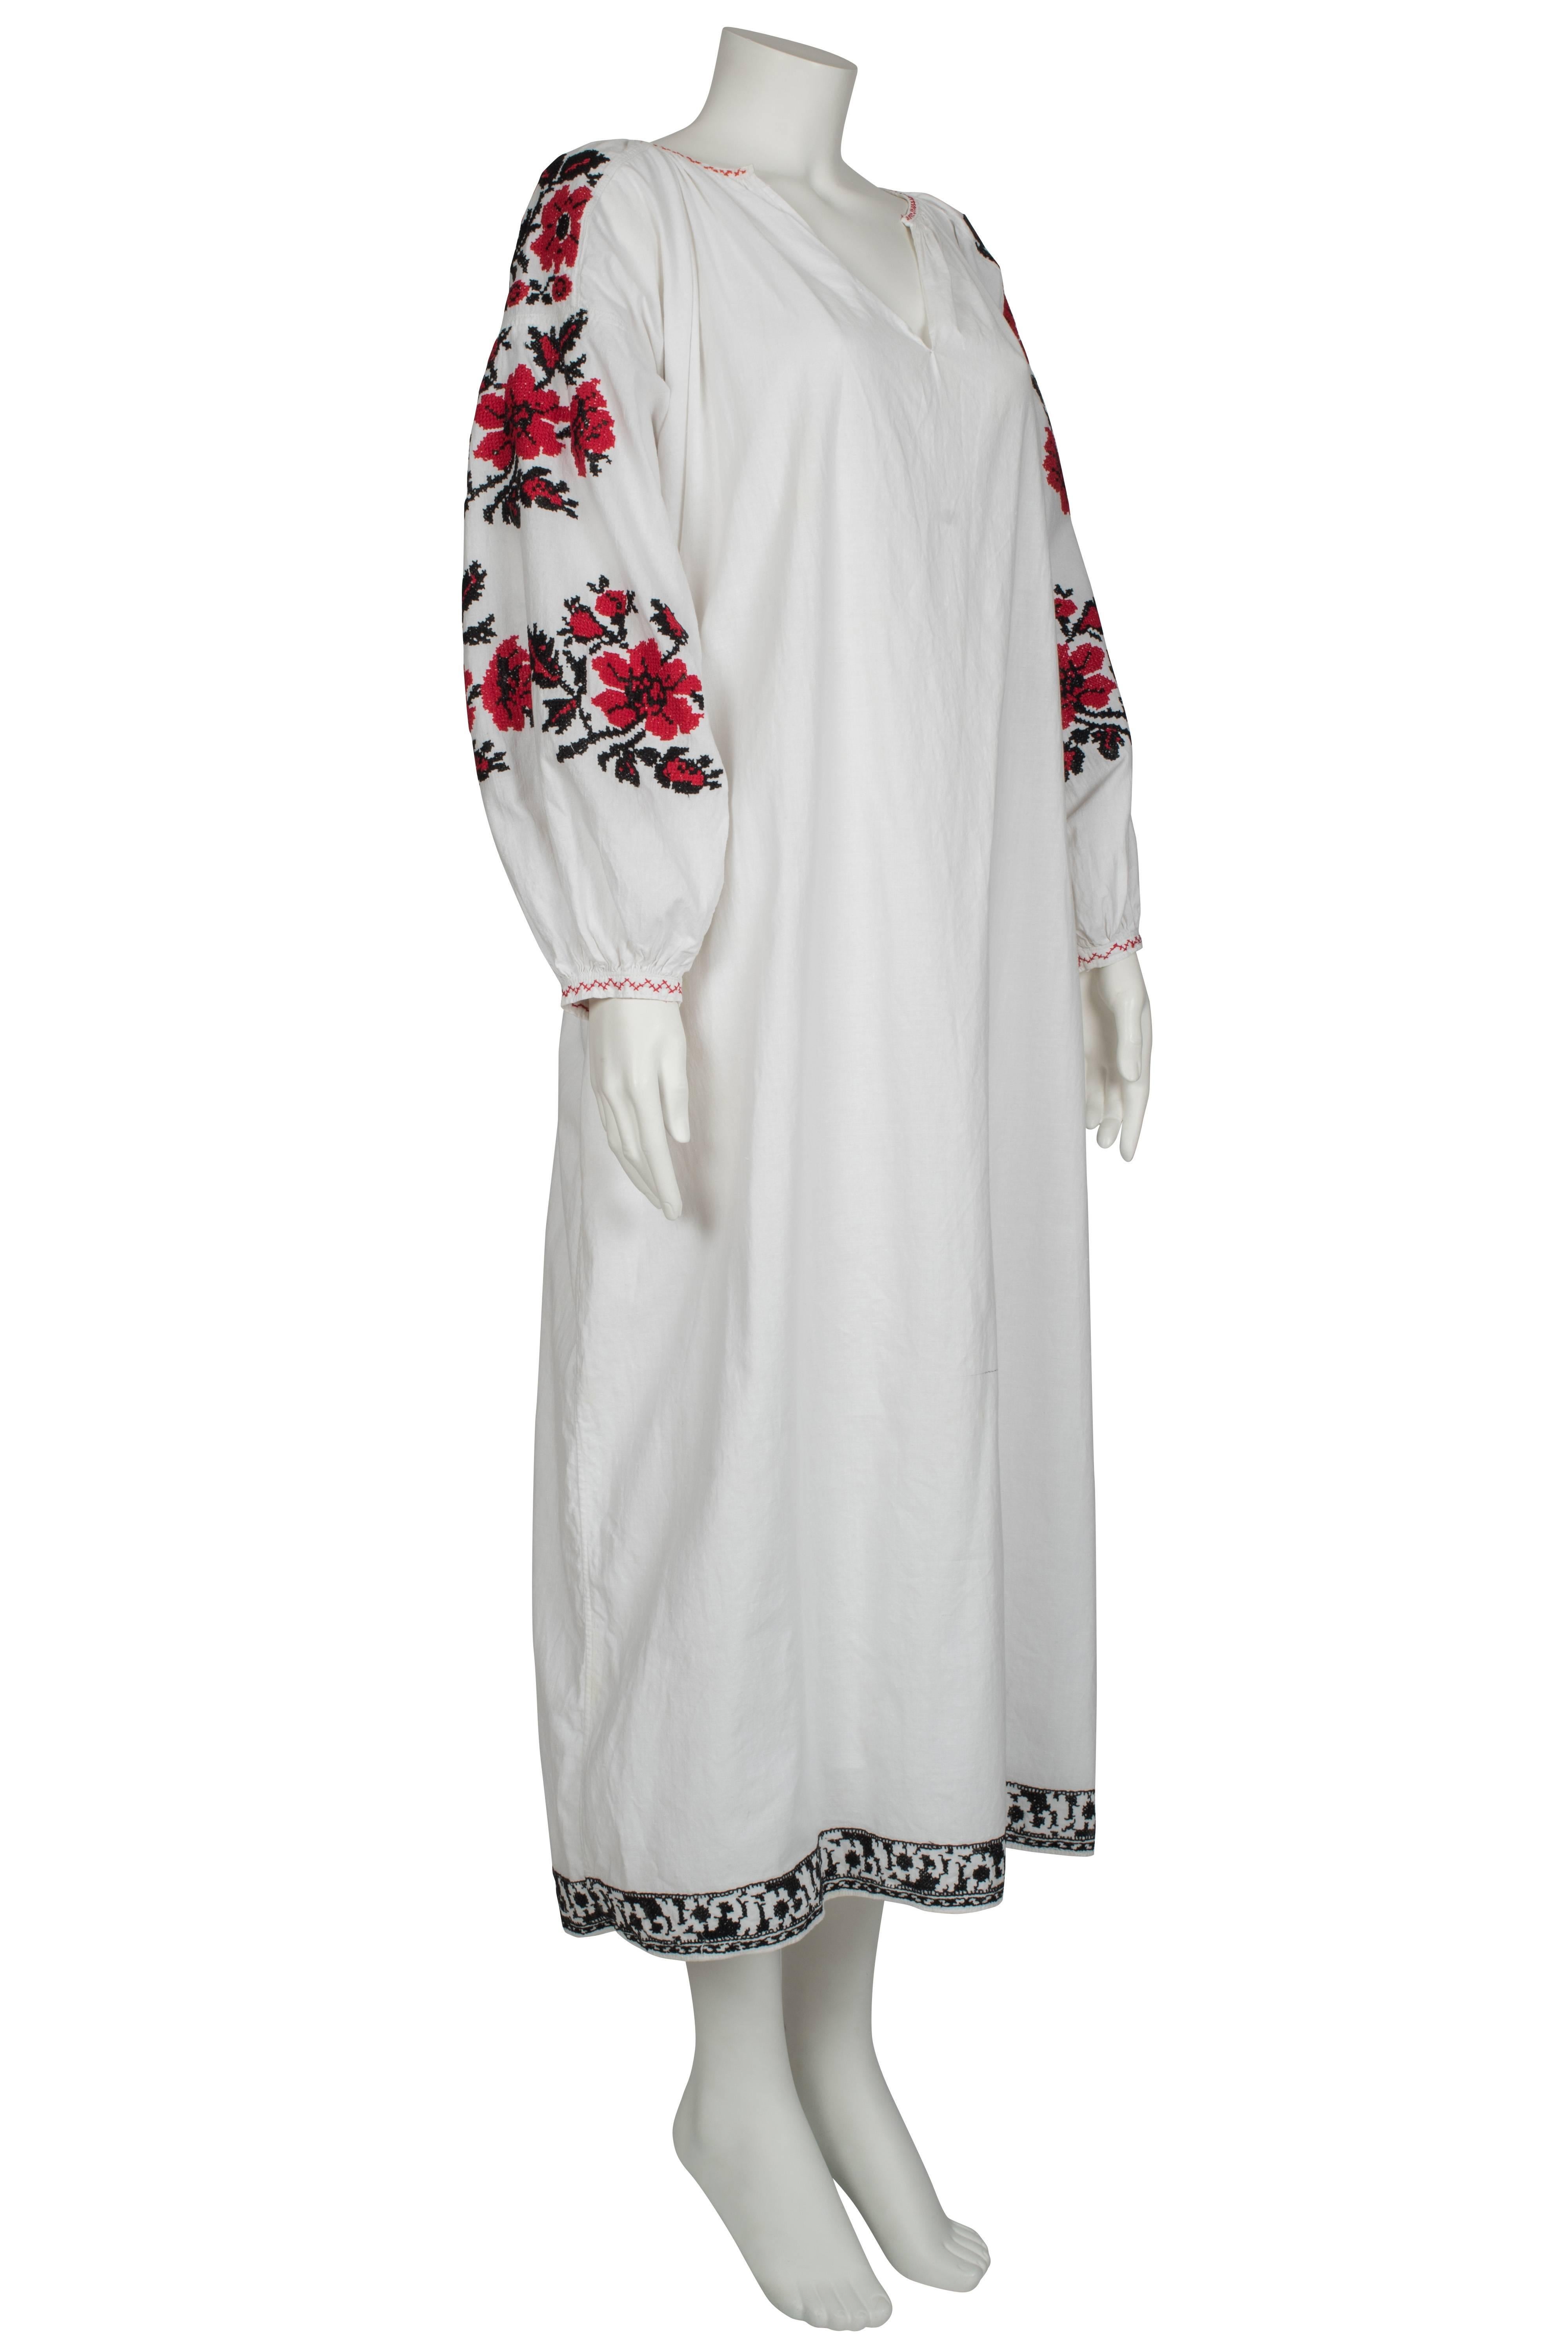 A 1970's Vyshyvanka cotton dress, hand embroidered according to Ukrainian Folk tradition, featuring a red and black cross-stitched floral pattern on both sleeves. A relaxed fit throughout, the dress has oversized sleeves and a discrete v on the